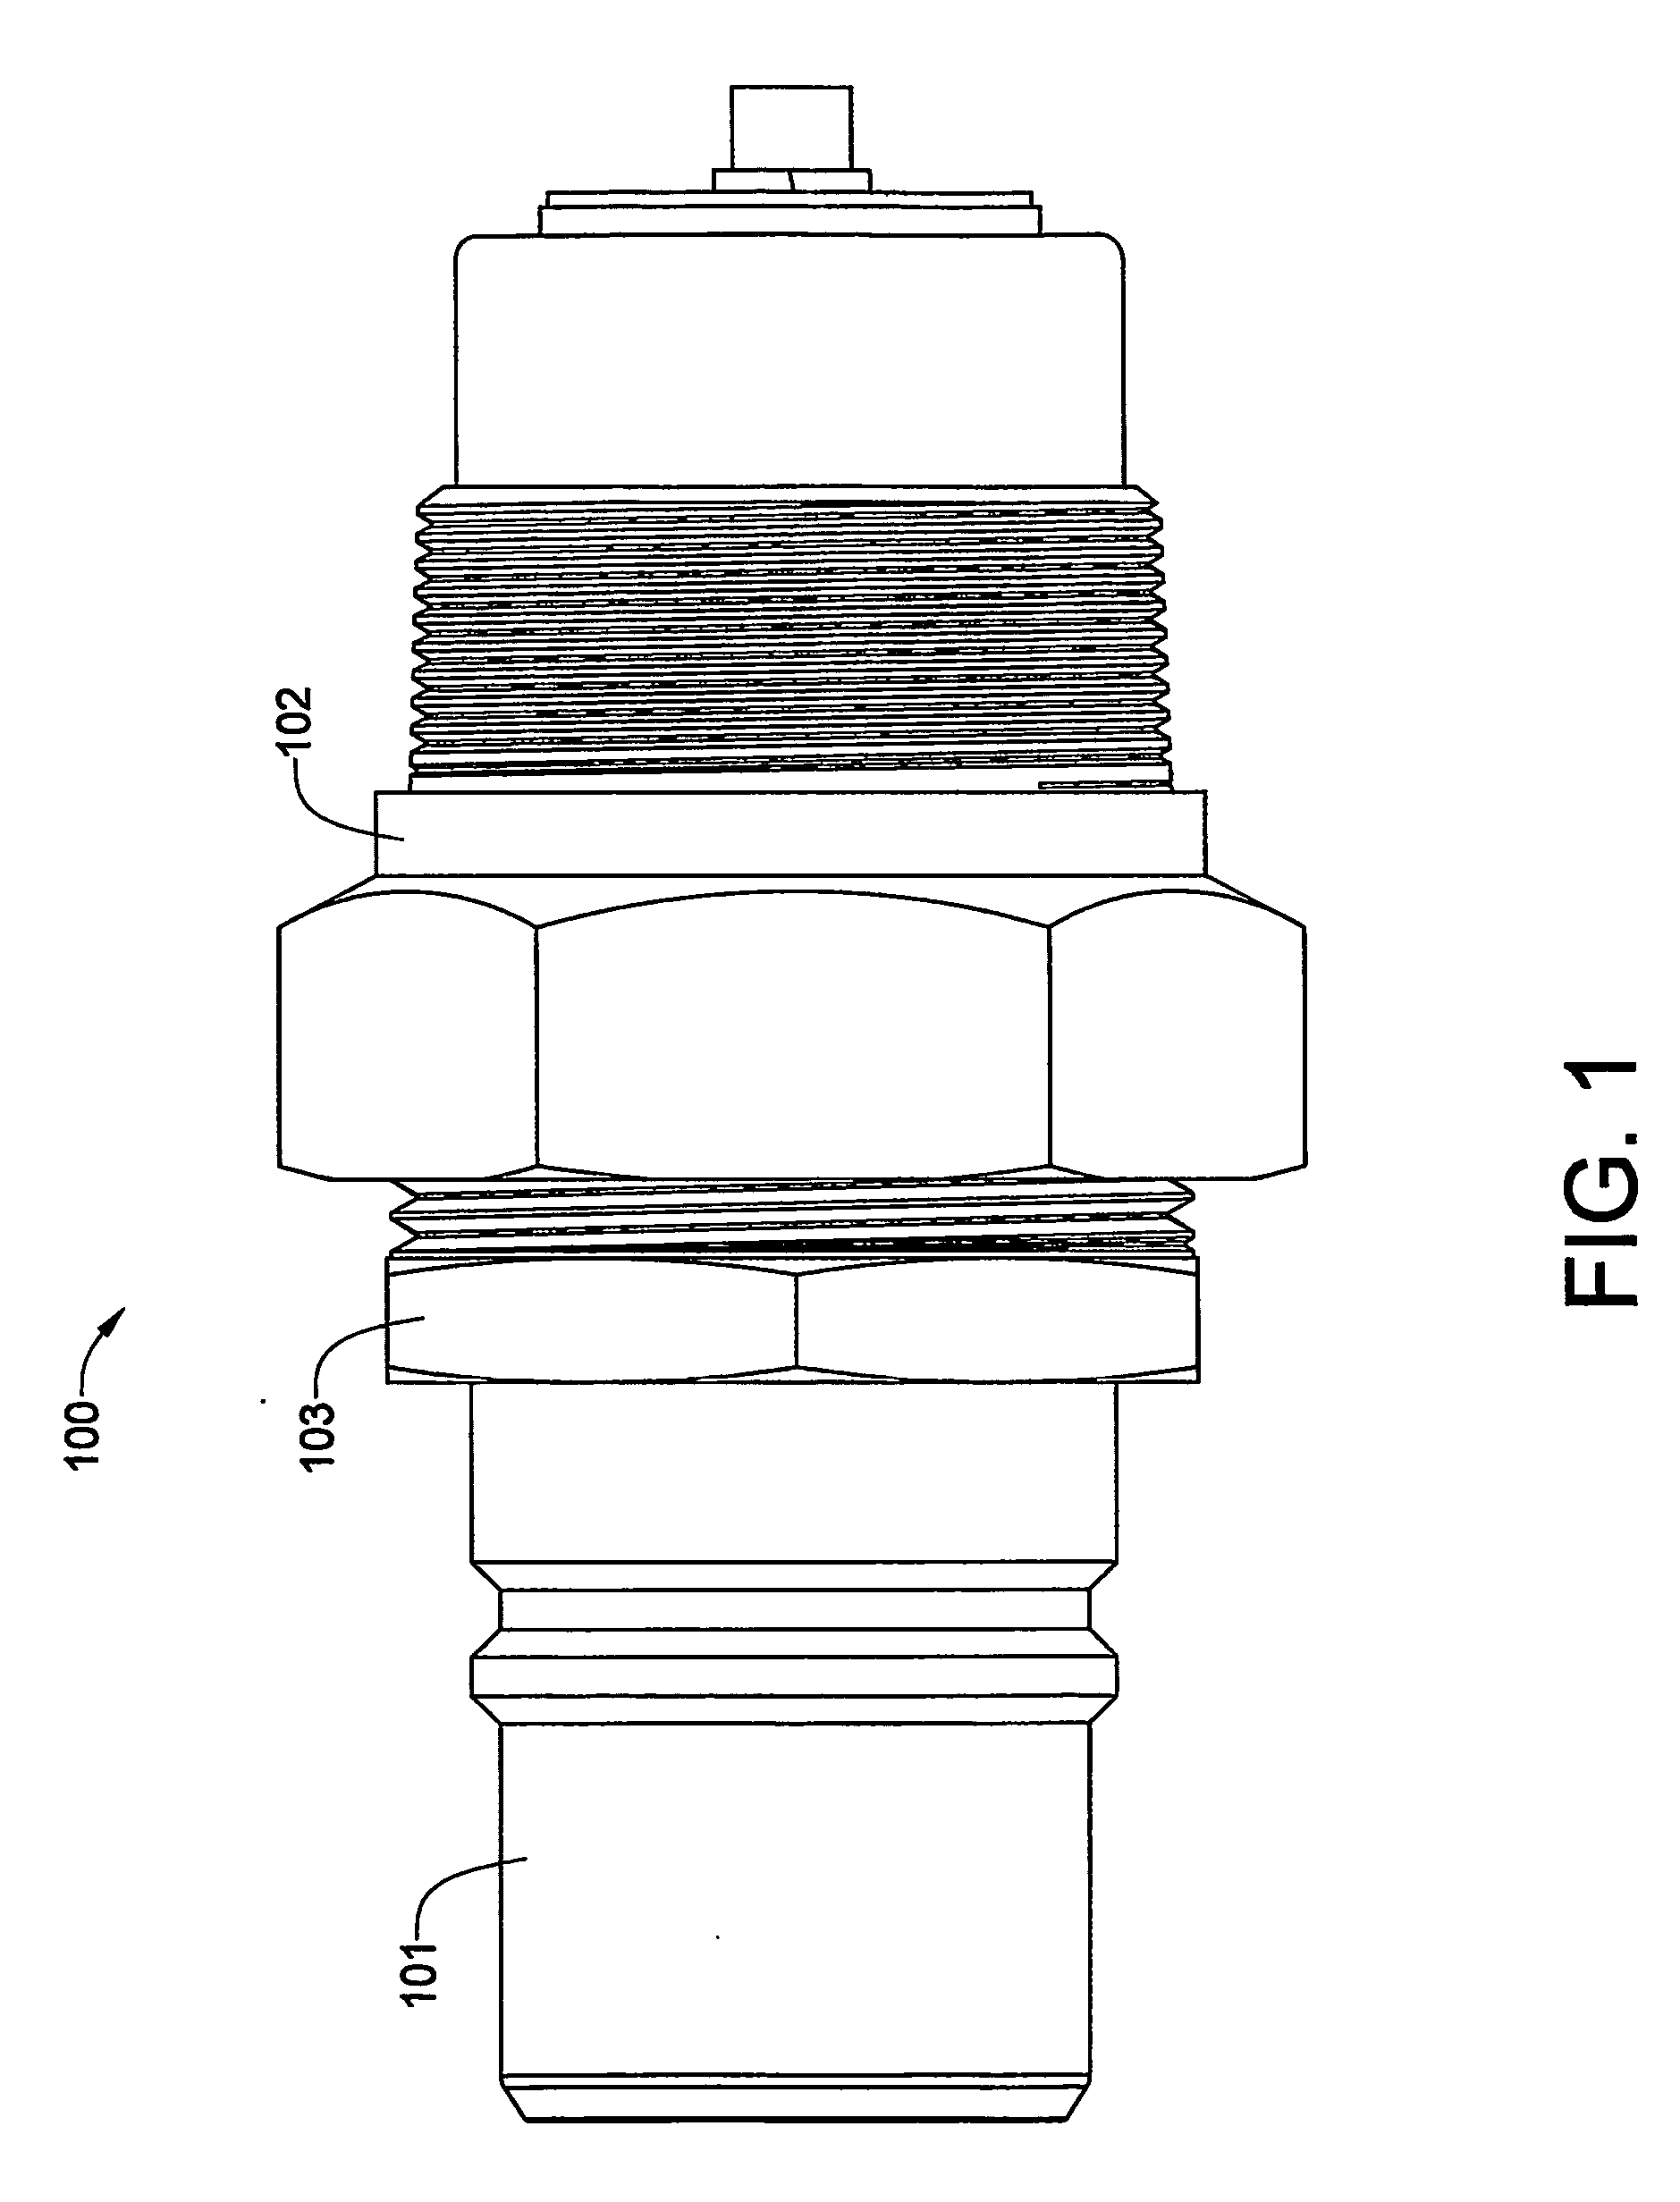 Refueling assembly having a check valve receptacle and a replaceable fuel receiver for bottom-filled fuel tanks